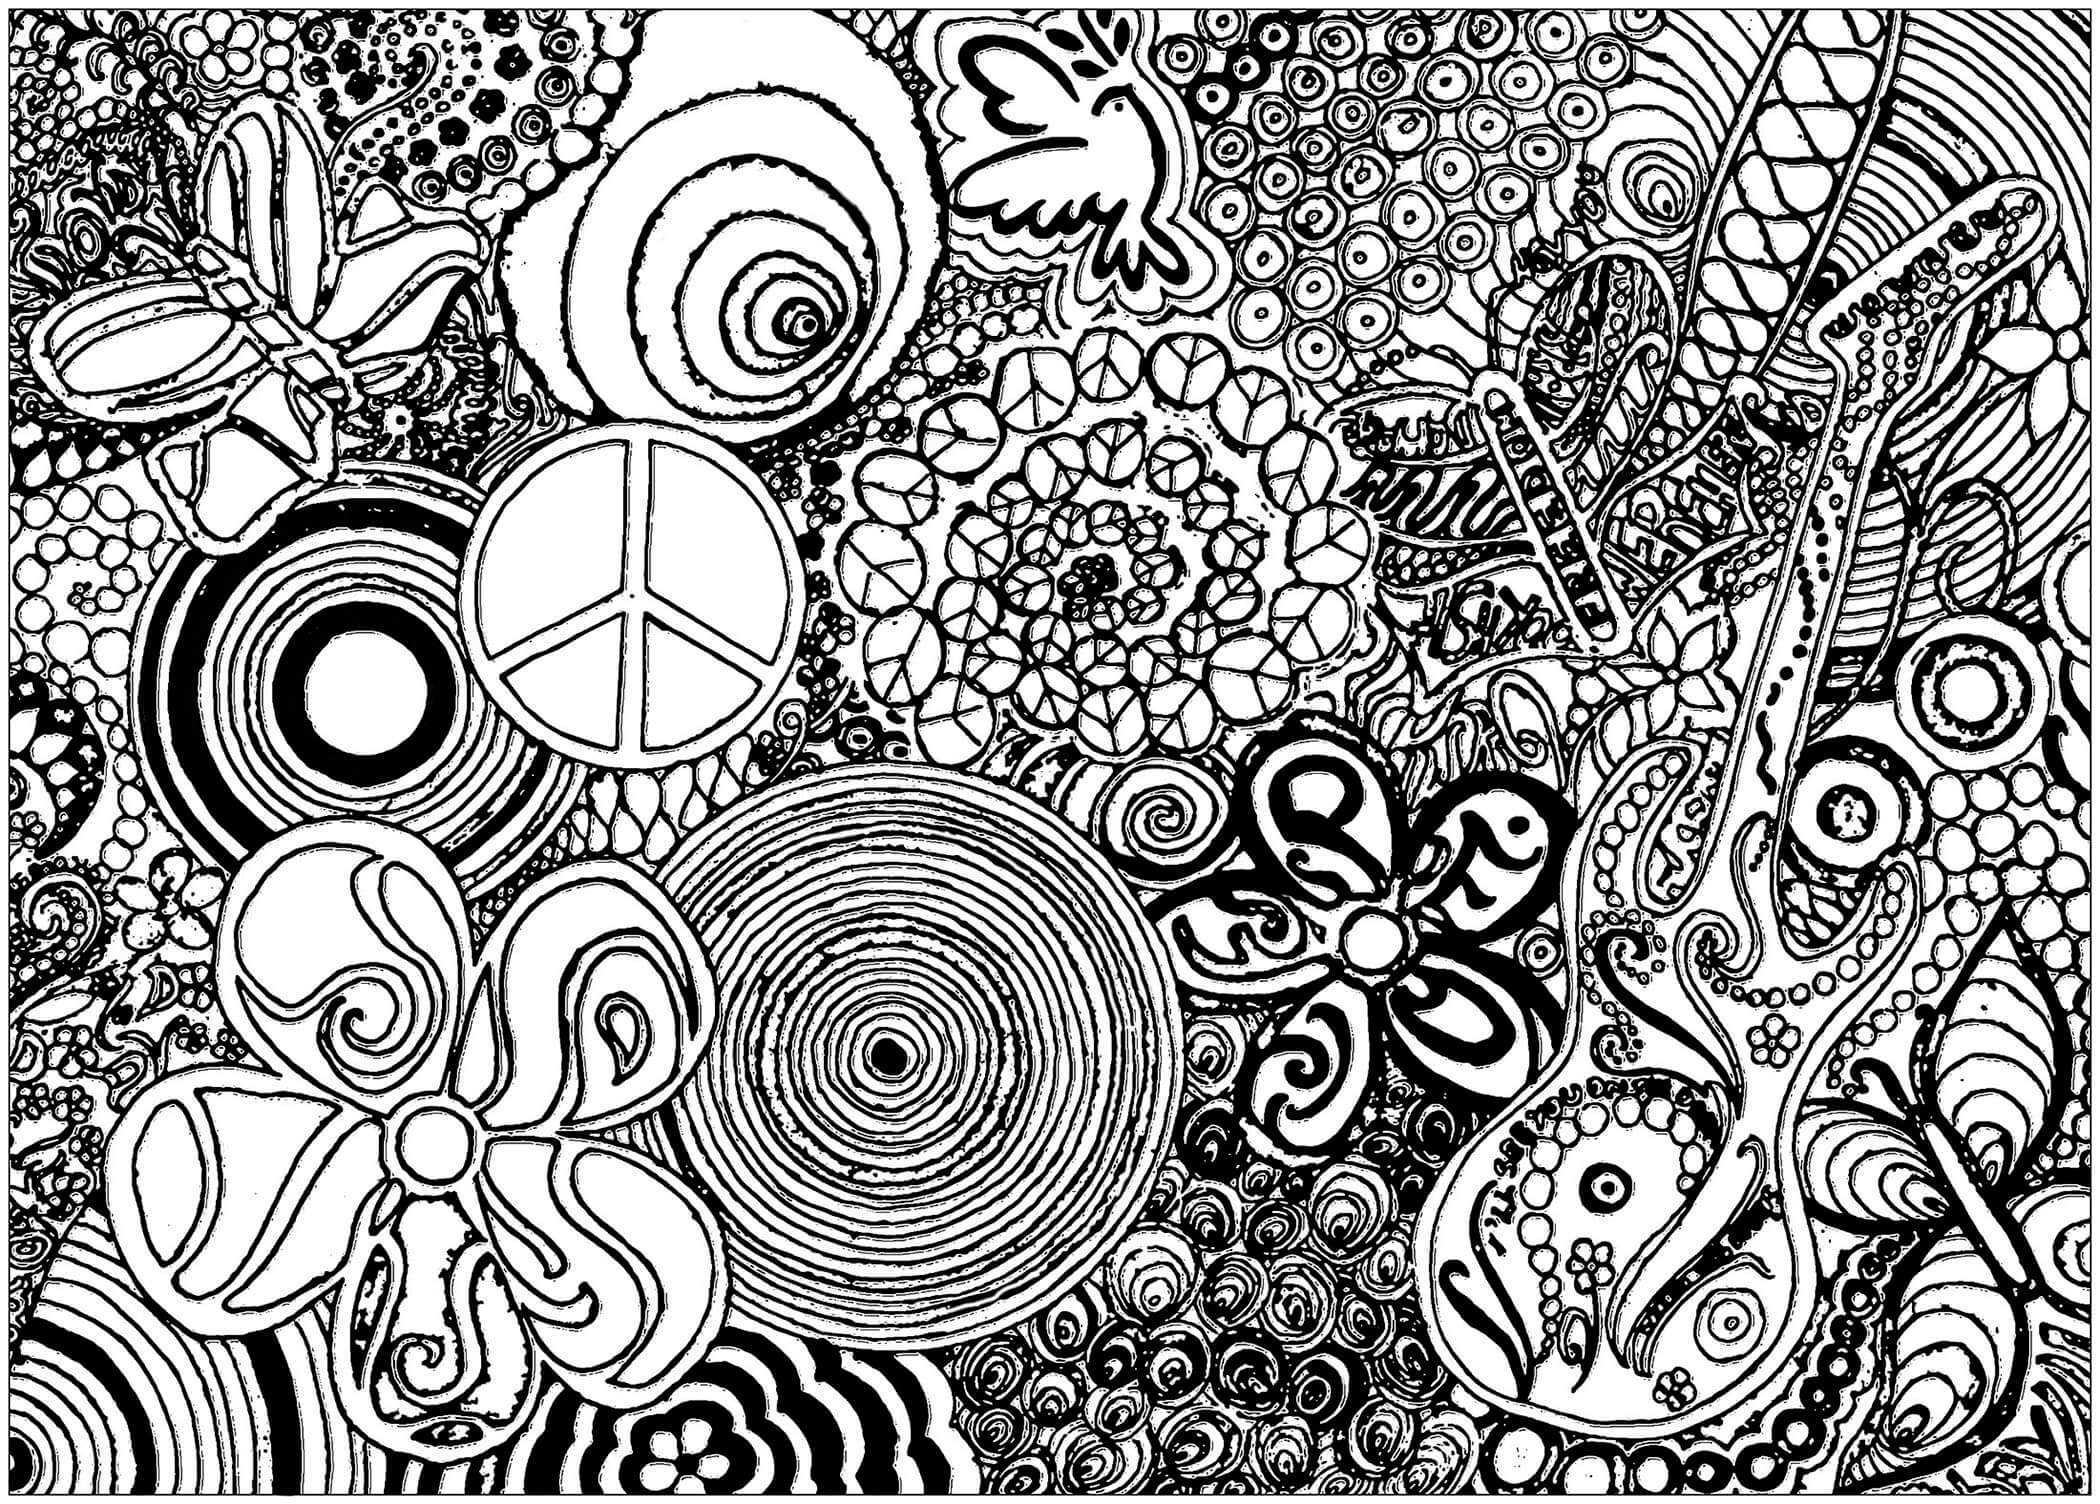 coloring classes for adults near me | types of coloring pages | easy trippy coloring pages for adults